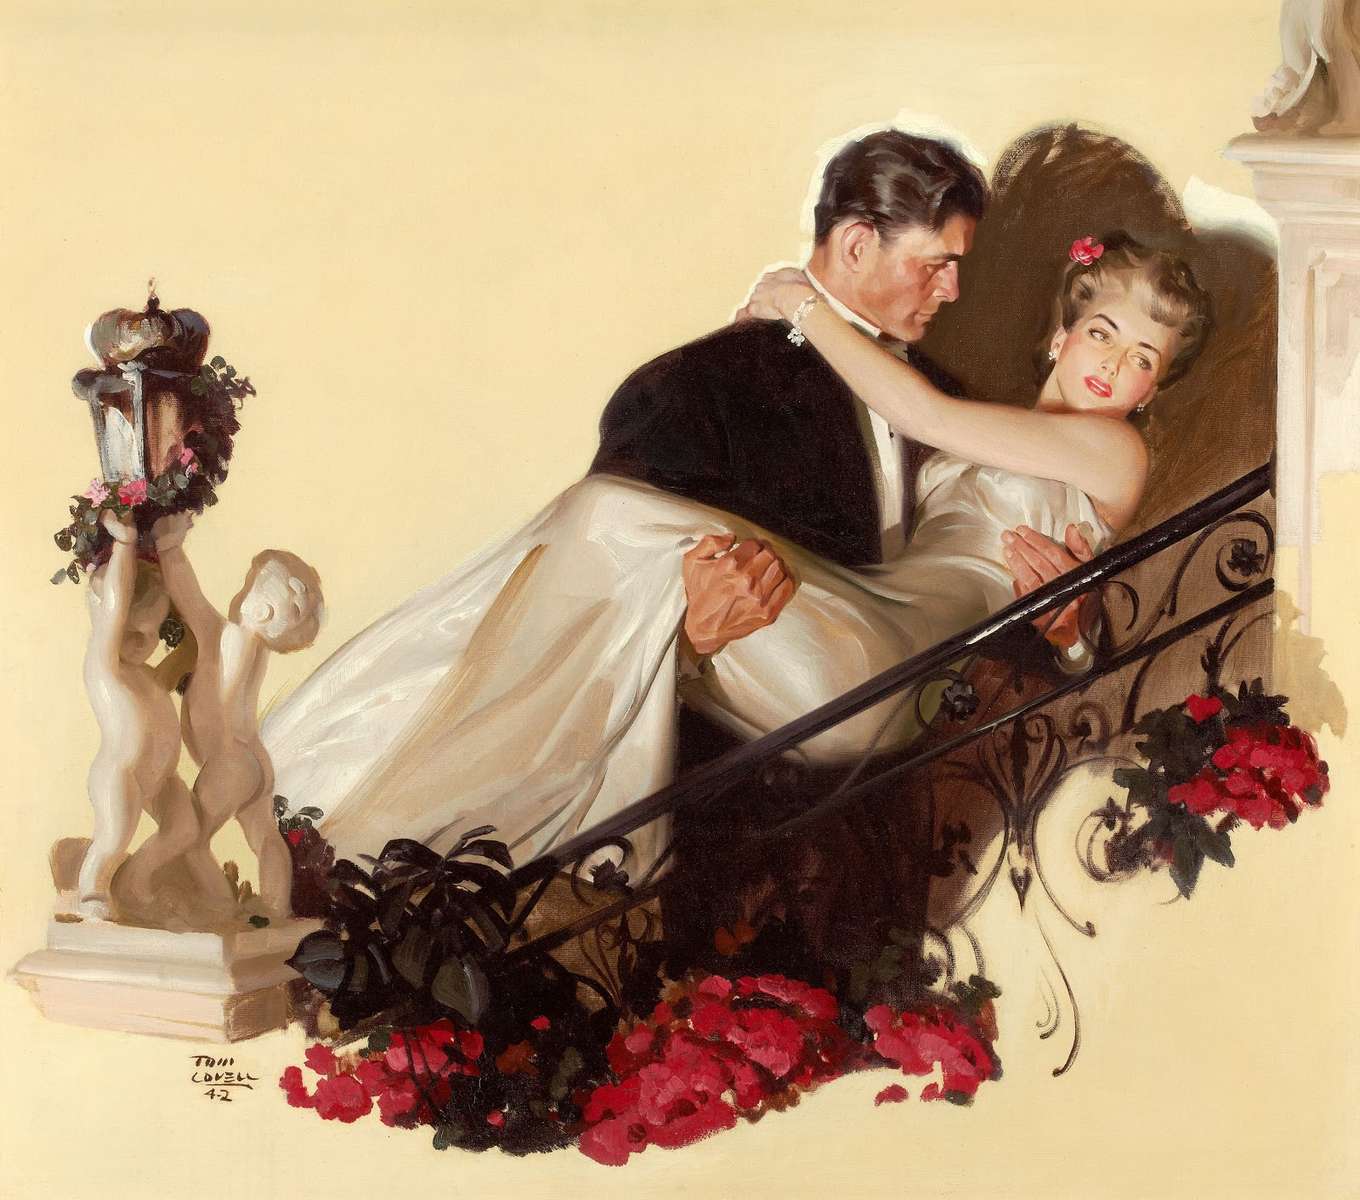 Tom Lovell „Na schodach (1942)” puzzle online